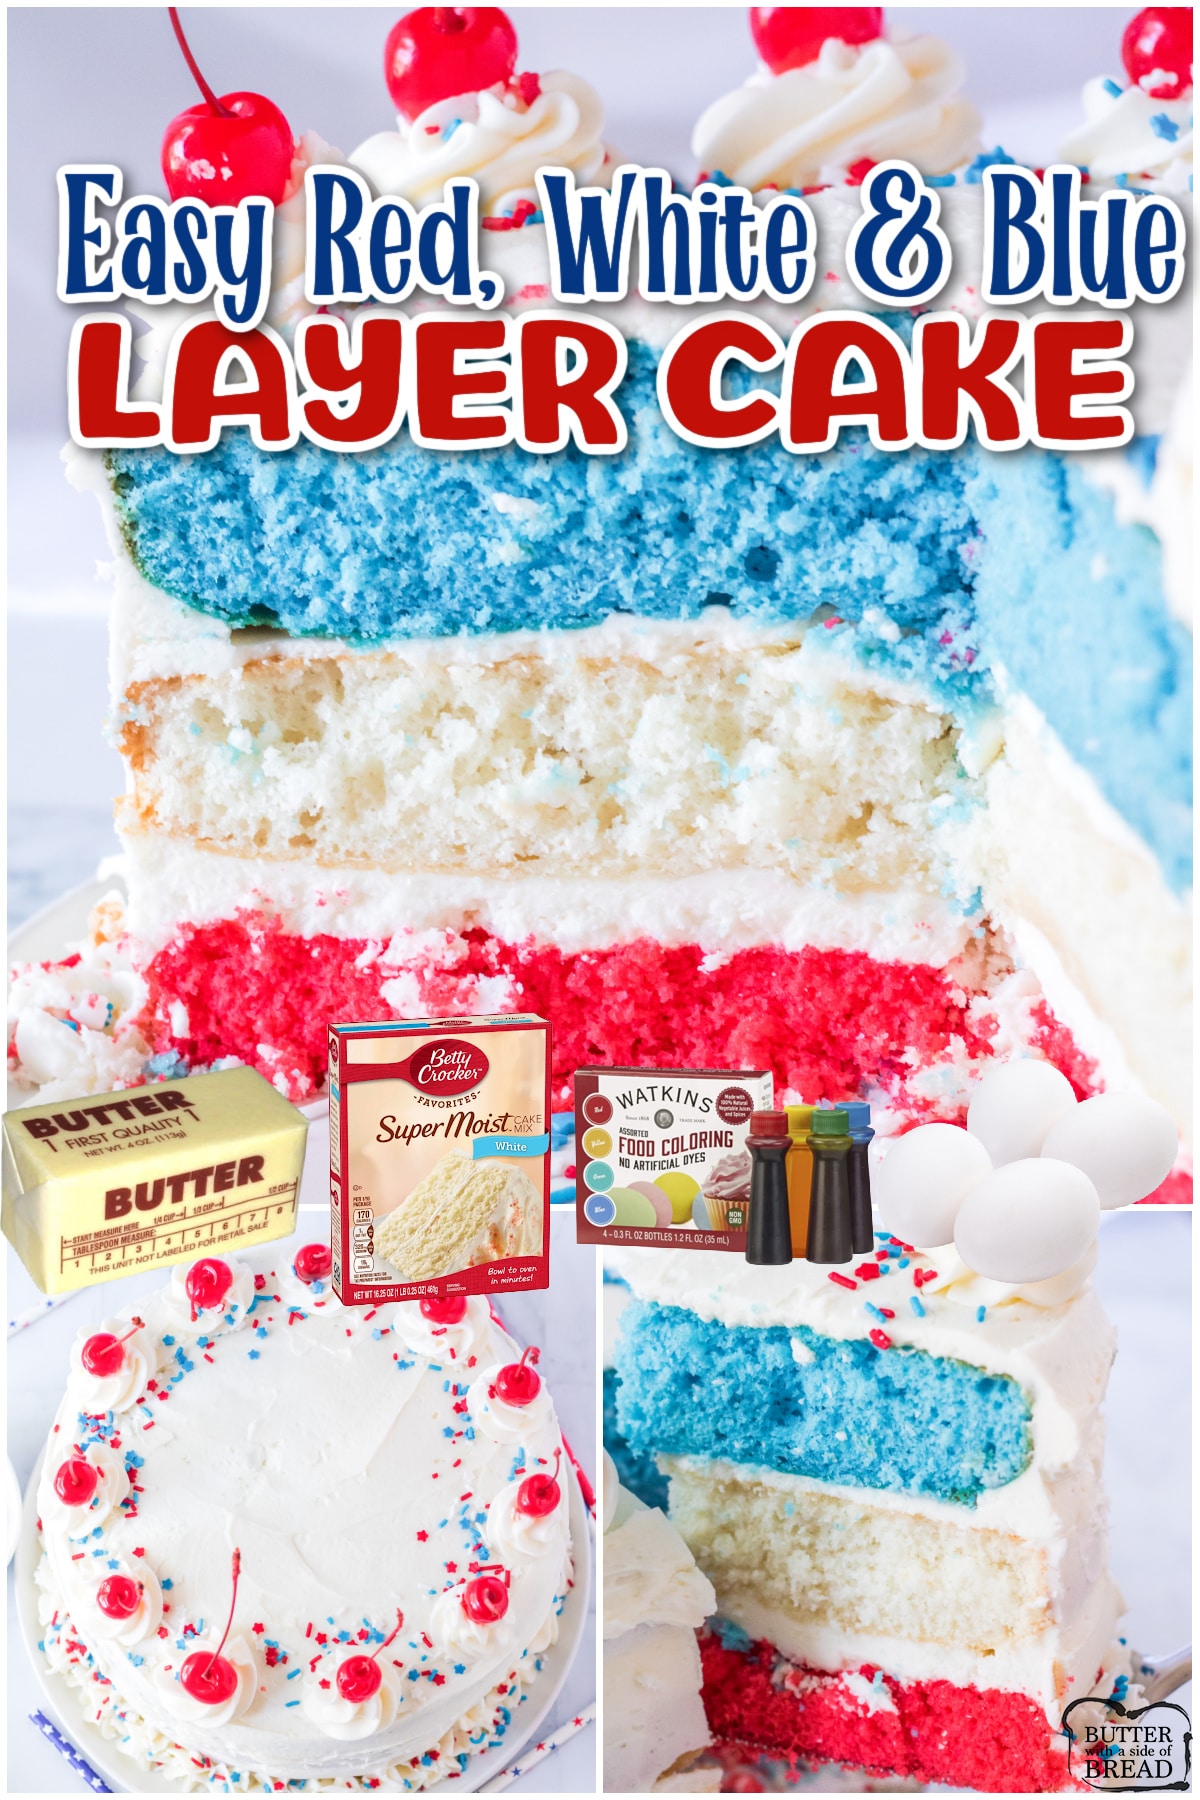 Our festive red, white & blue cake is a patriotic cake perfect for the 4th! Easy, showstopper red, white and blue cake recipe that uses cake mix! 